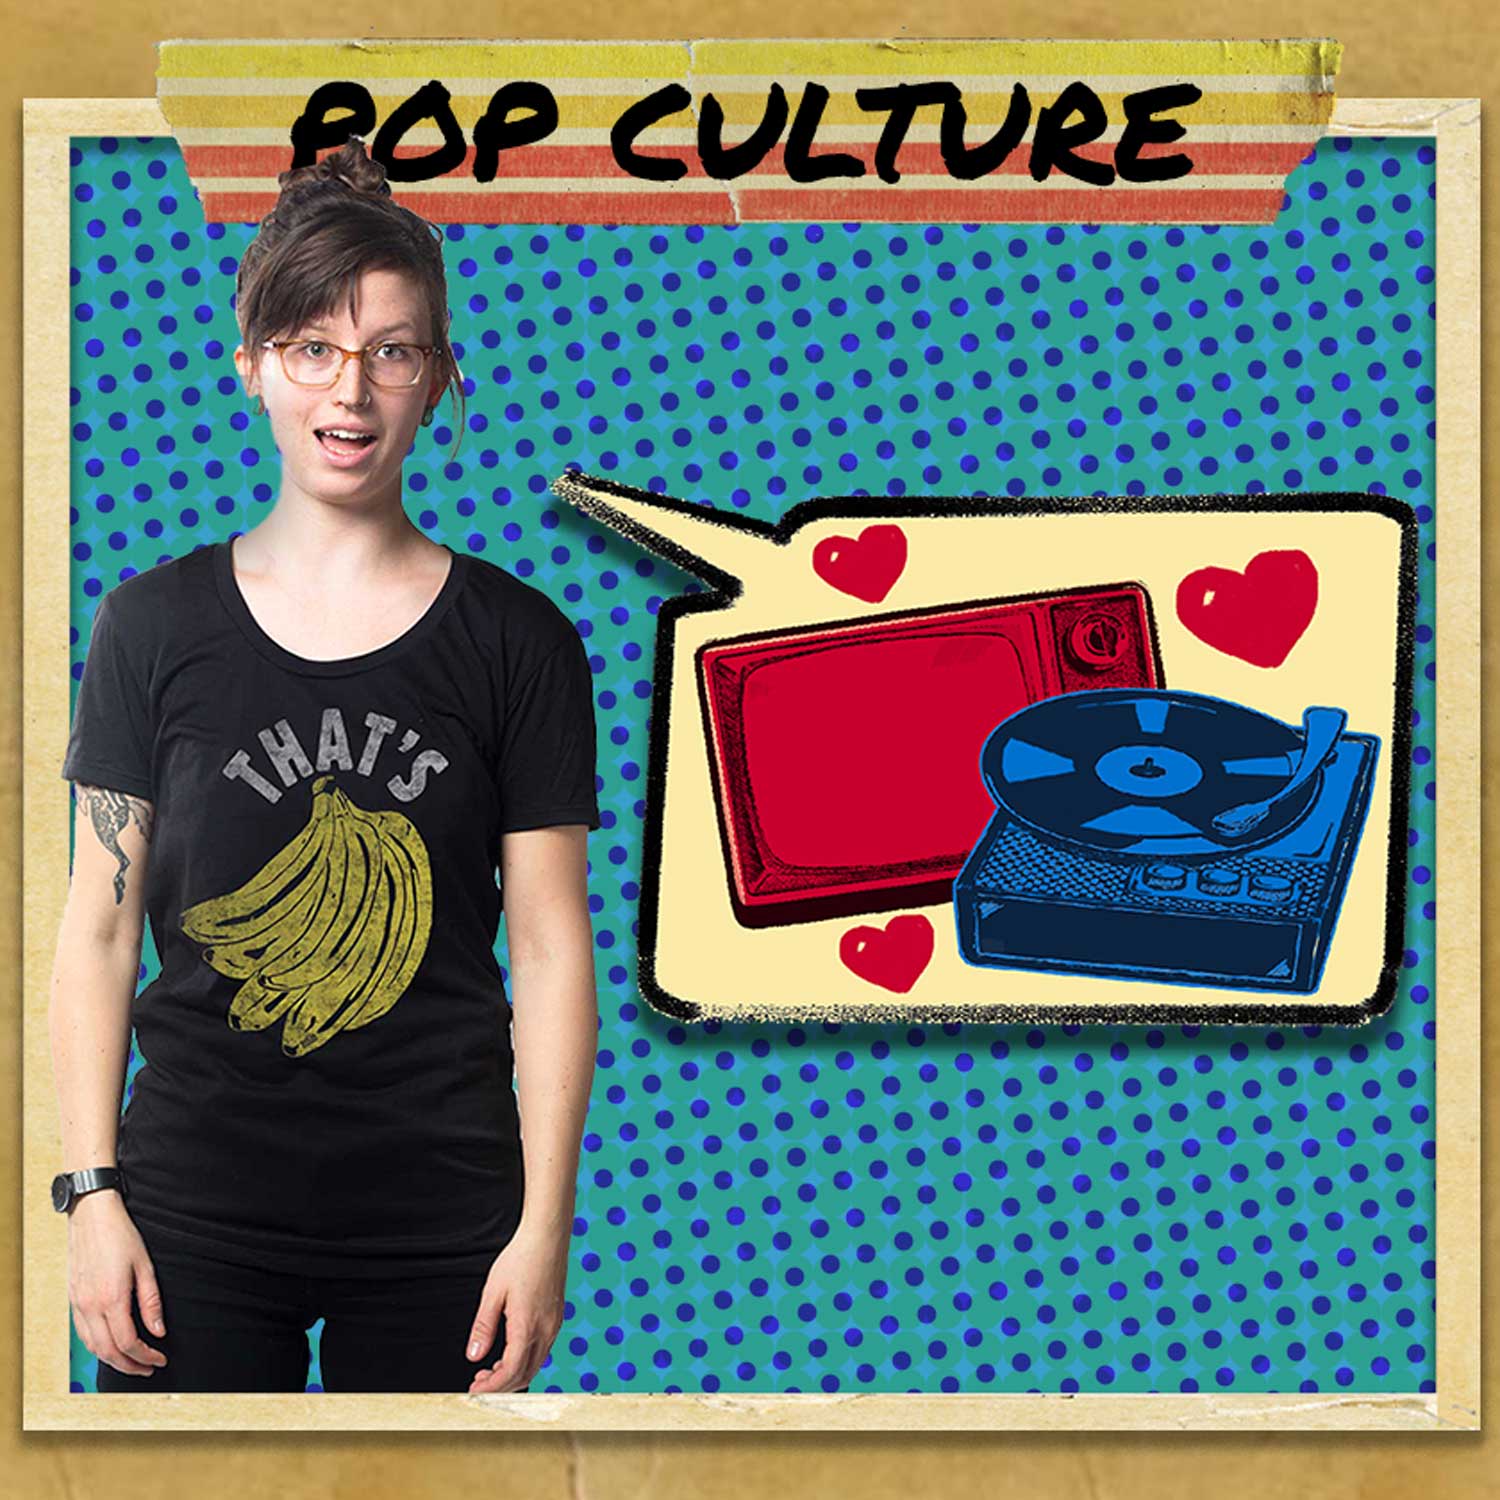 Retro Pop Culture Graphic Tees | Cool Vintage 80s Inspired T-Shirts | Solid Threads